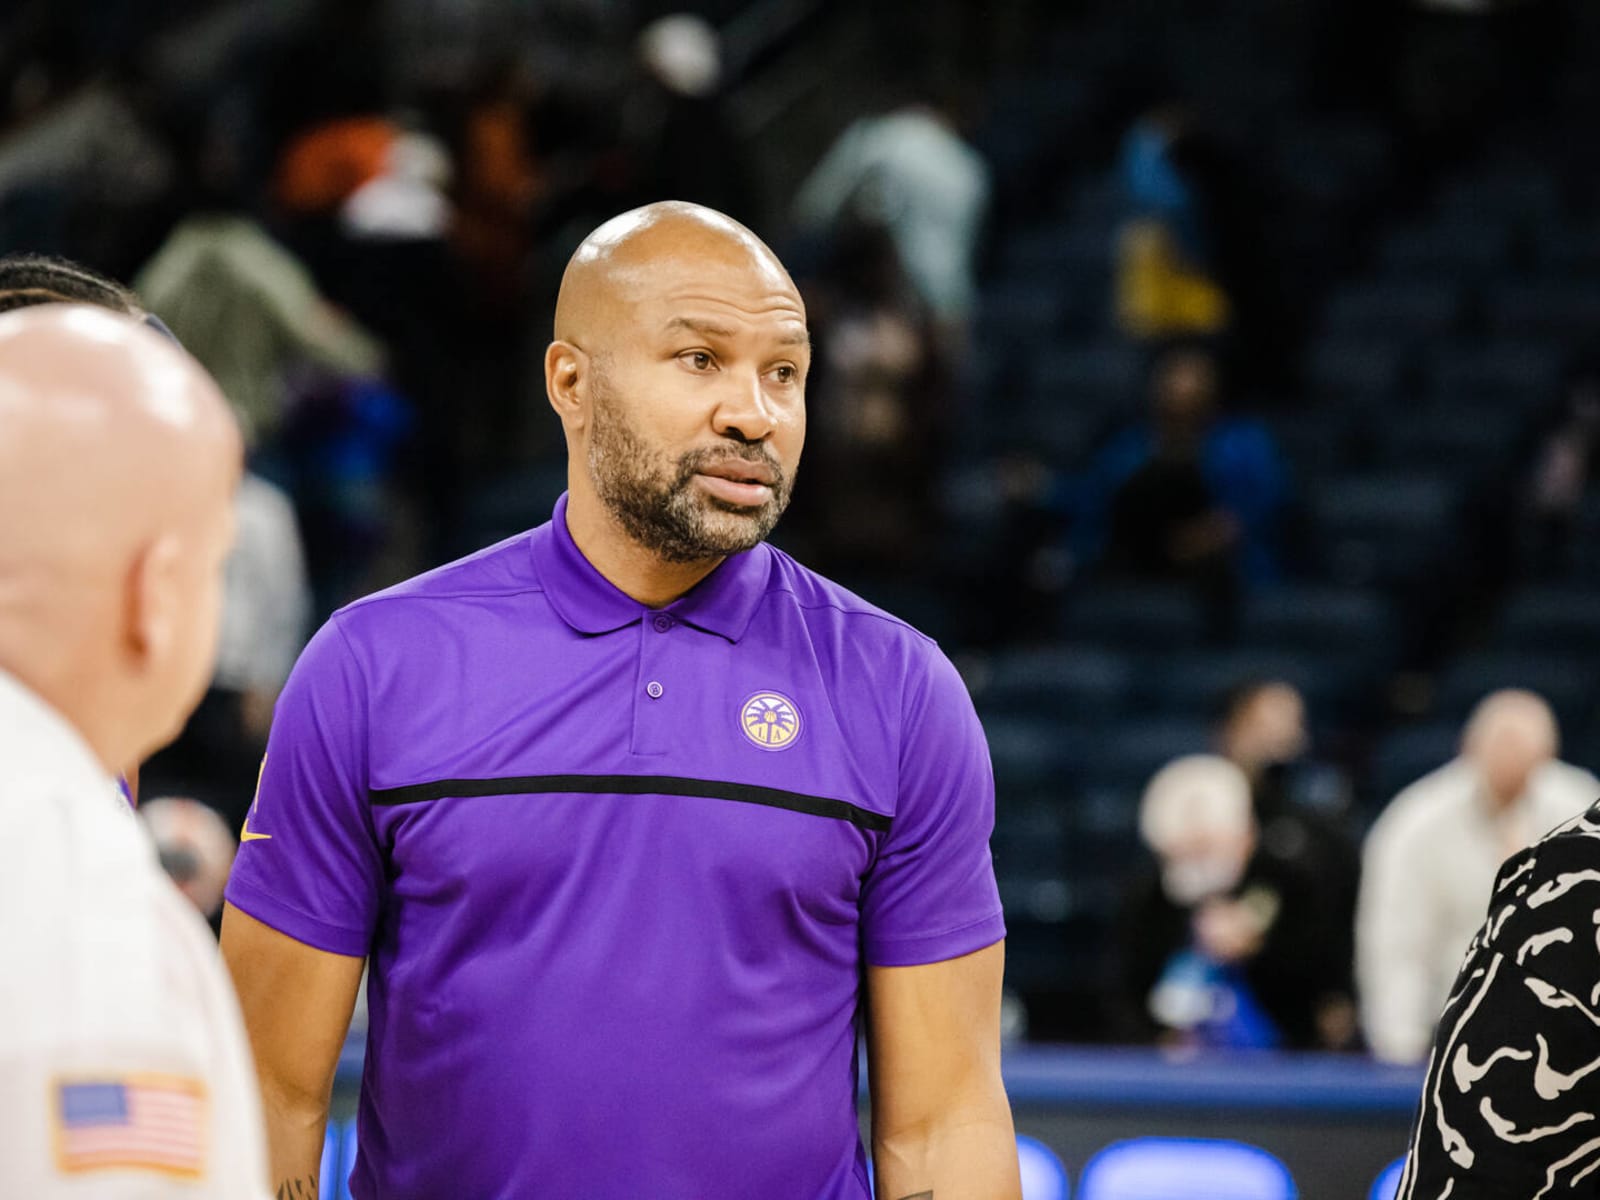 Lakers to talk with Derek Fisher, weeks from coach hire